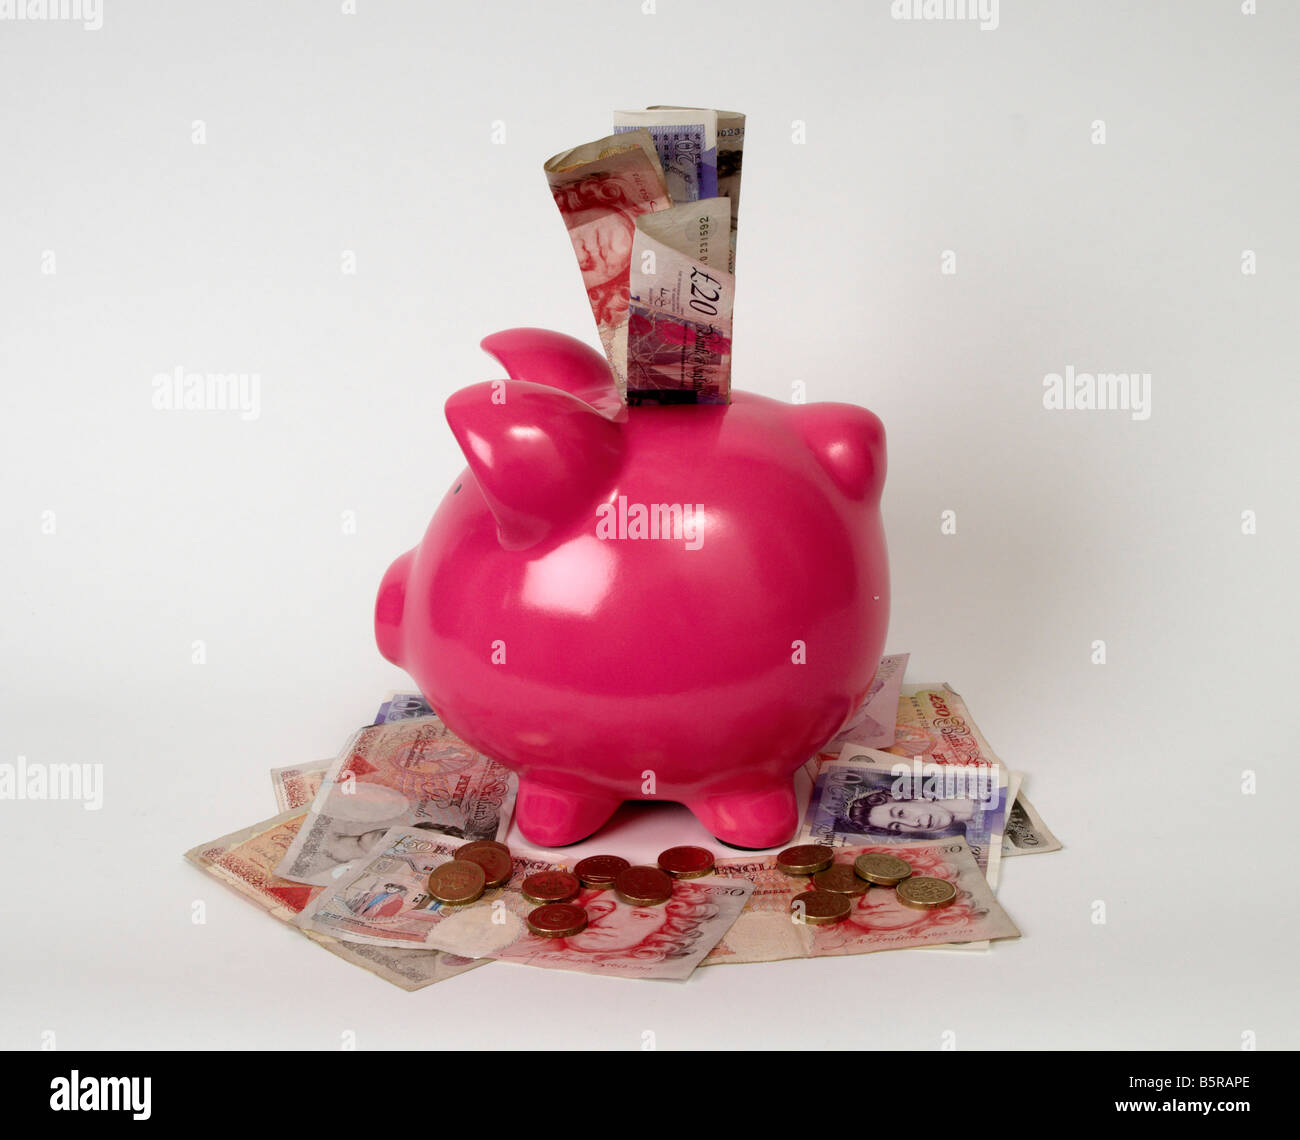 profile of a pink piggy bank sitting on a pile of british bank notes and coins with bank notes sticking out the top of it. Stock Photo